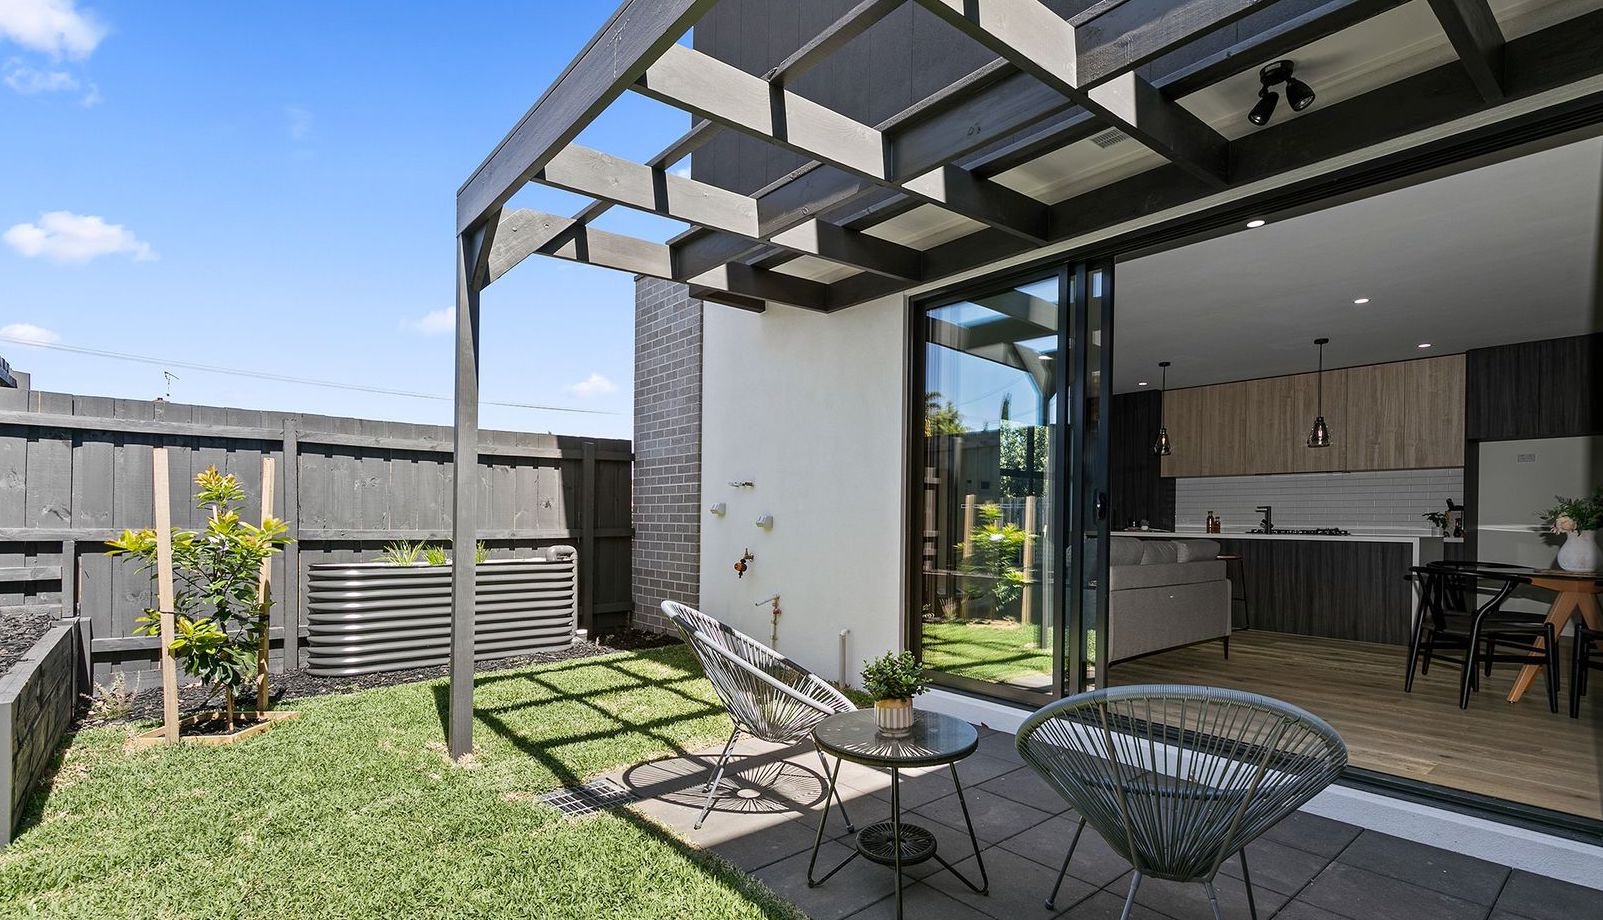 Pascoe Vale South - 9 Reynolds Parade, Pascoe Vale South, VIC 3044 - Townly - 11.jpeg